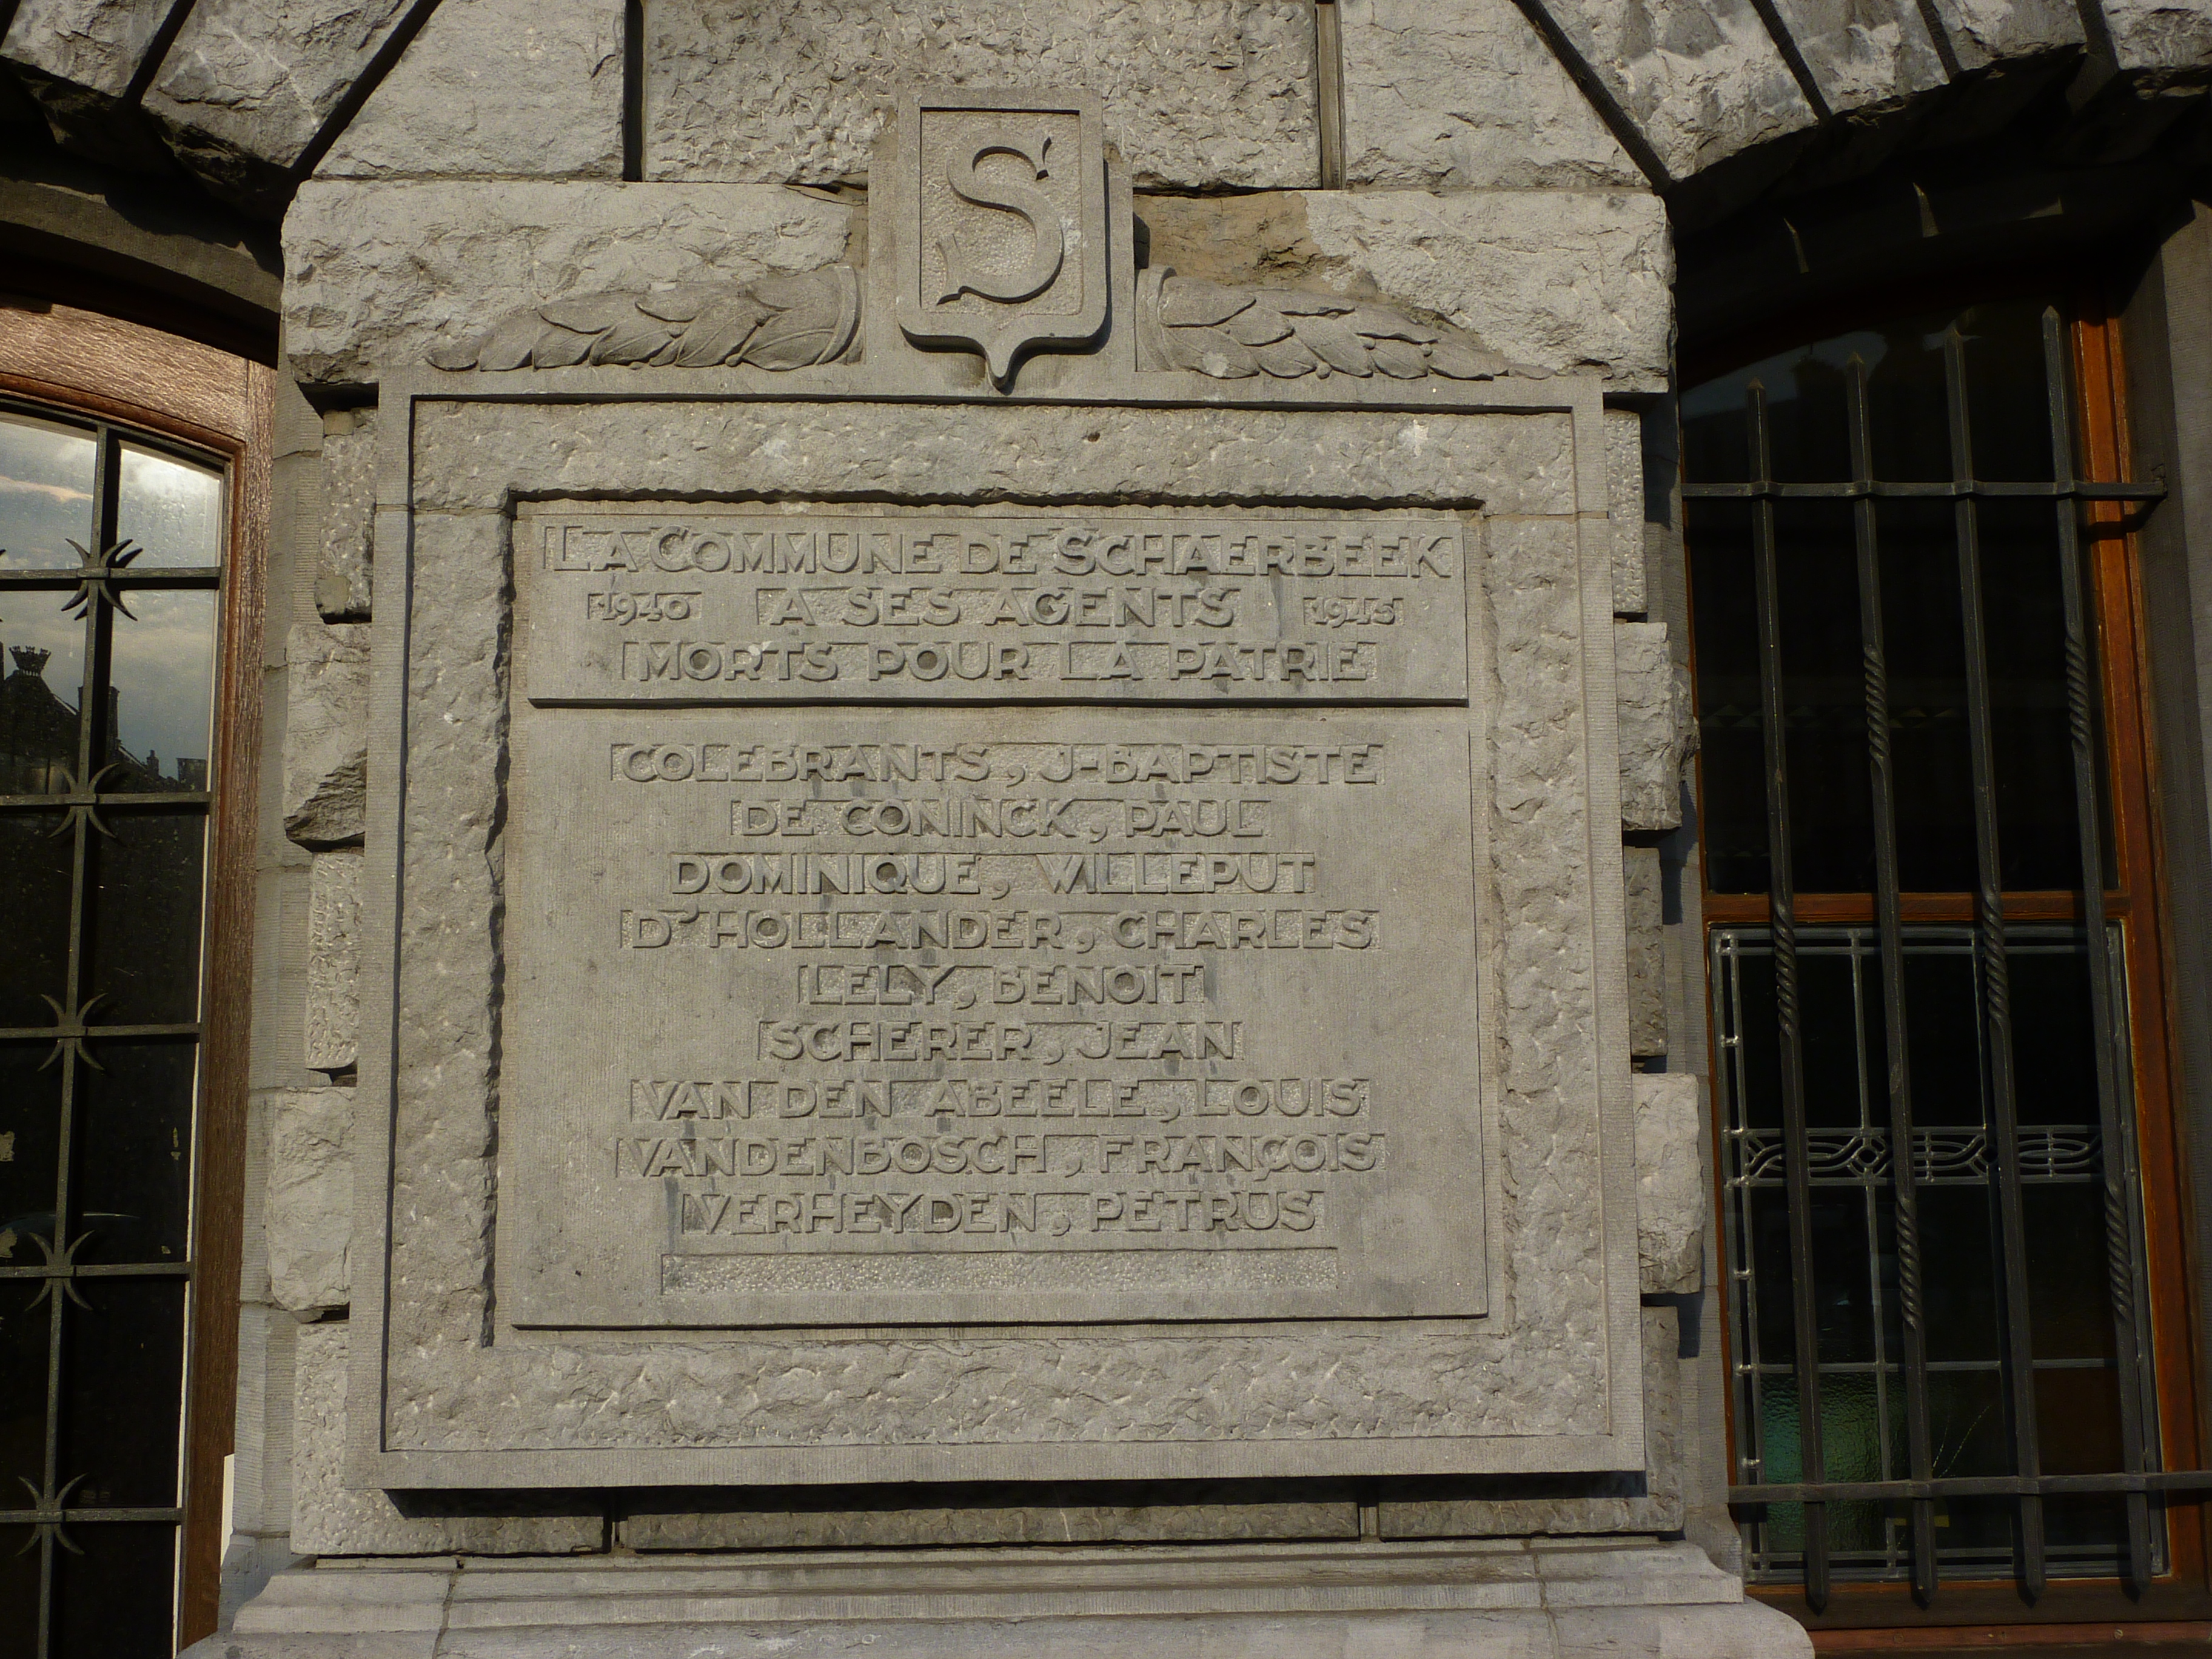 Plaque in Schaerbeek to employees of the local government who "died for the nation" in the Second World War. The blank line at the bottom once held De Wael's father's name.